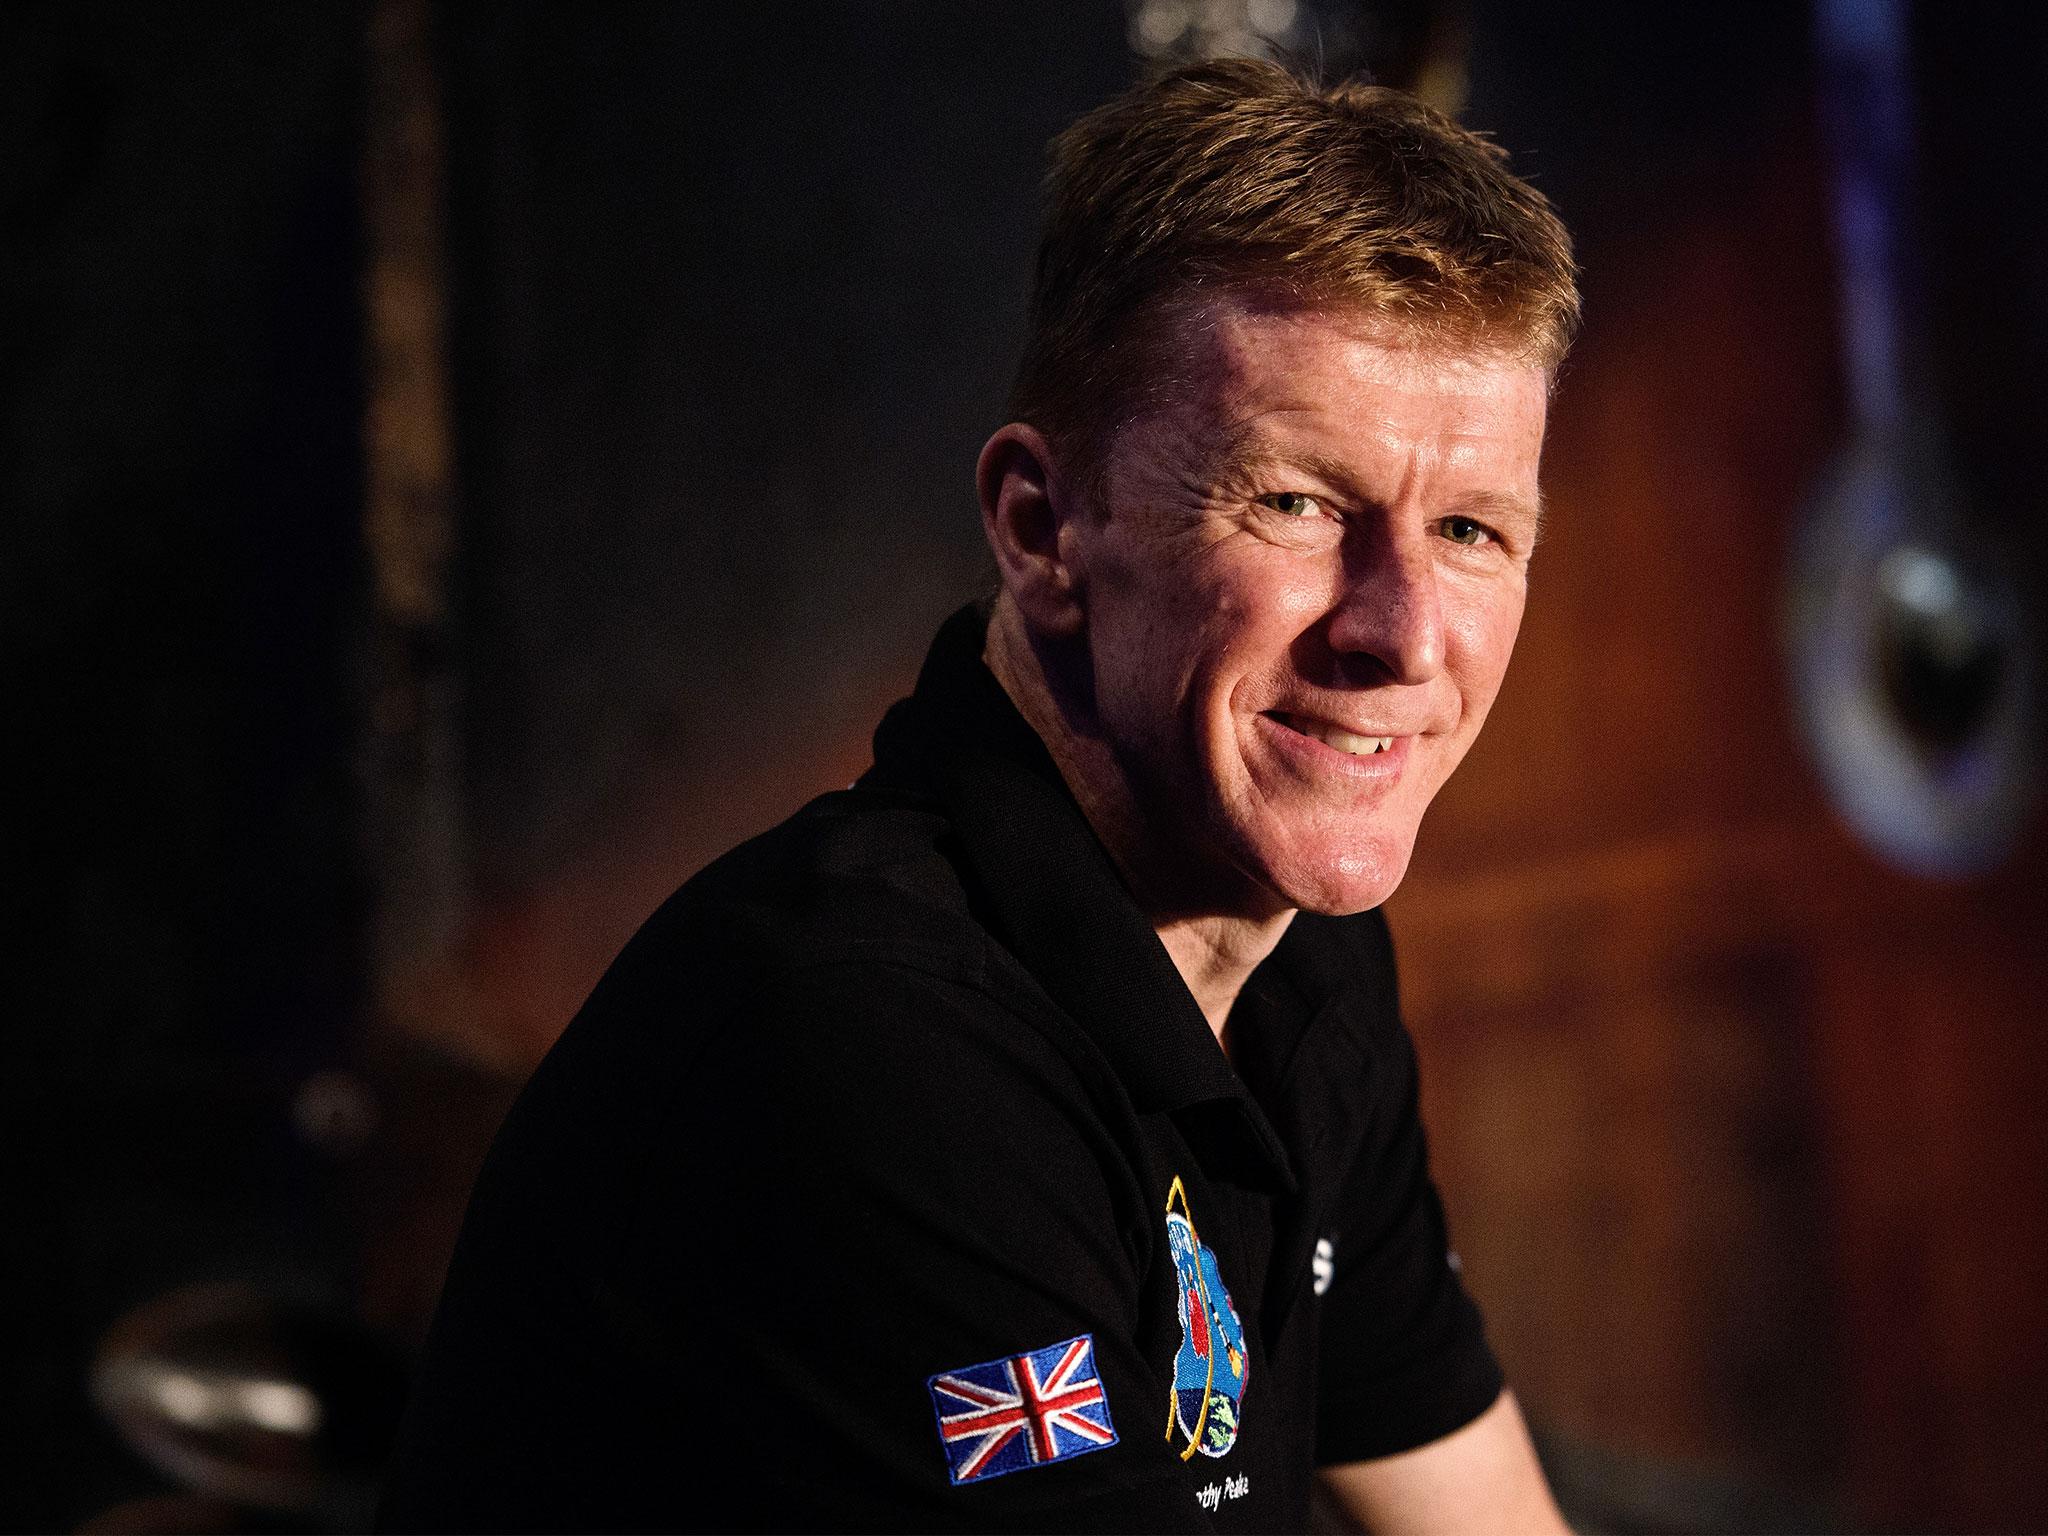 Peake believes humans could land on Mars within the next 20 years